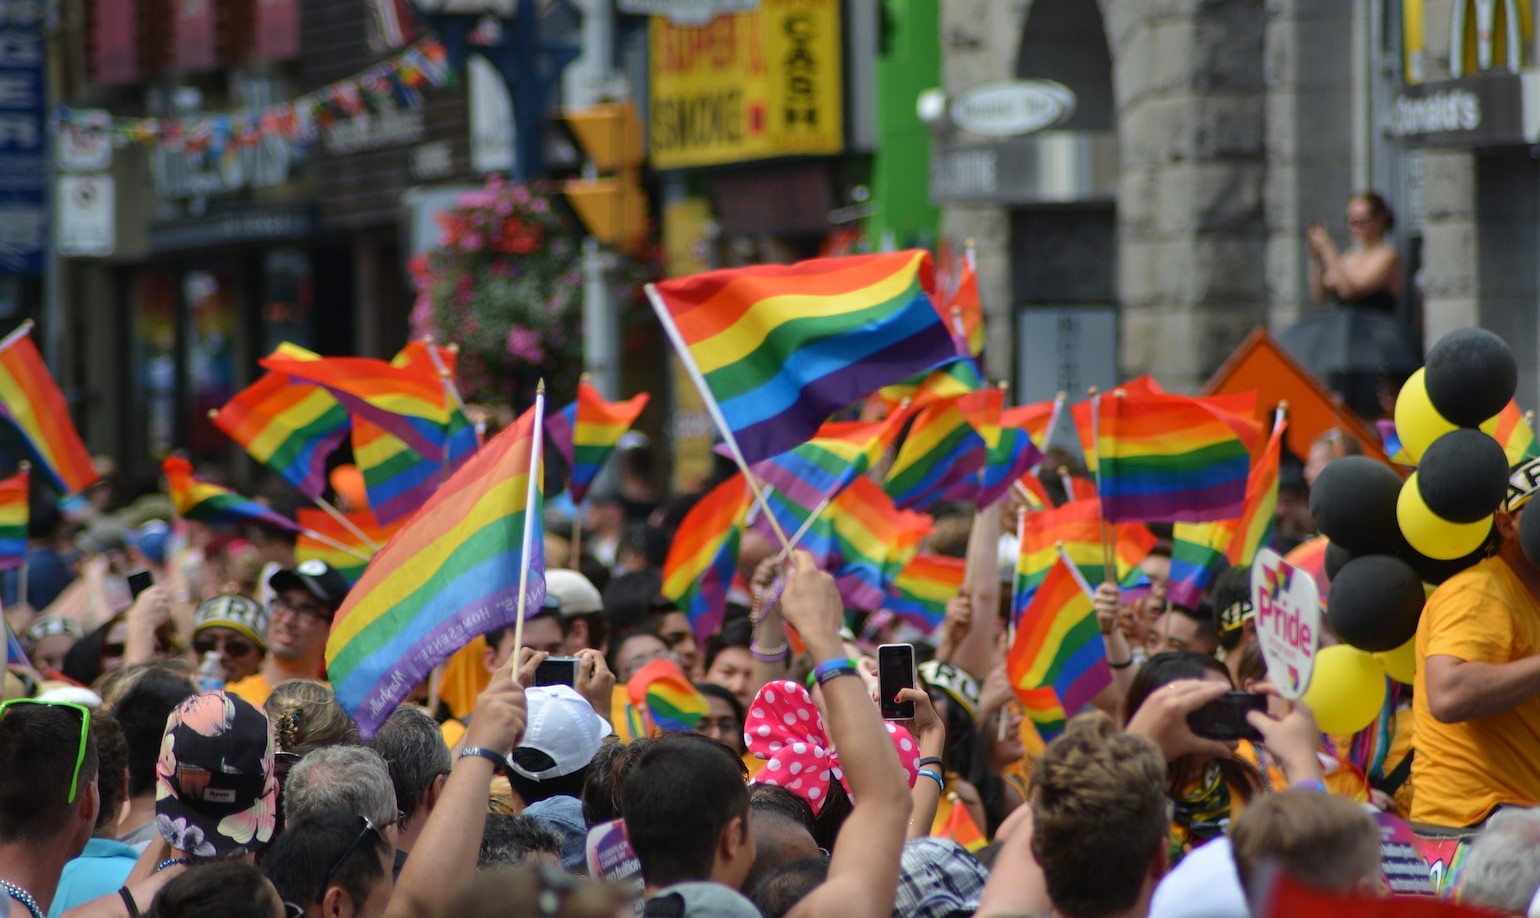 Crowds of people waving rainbow flags for Pride Month